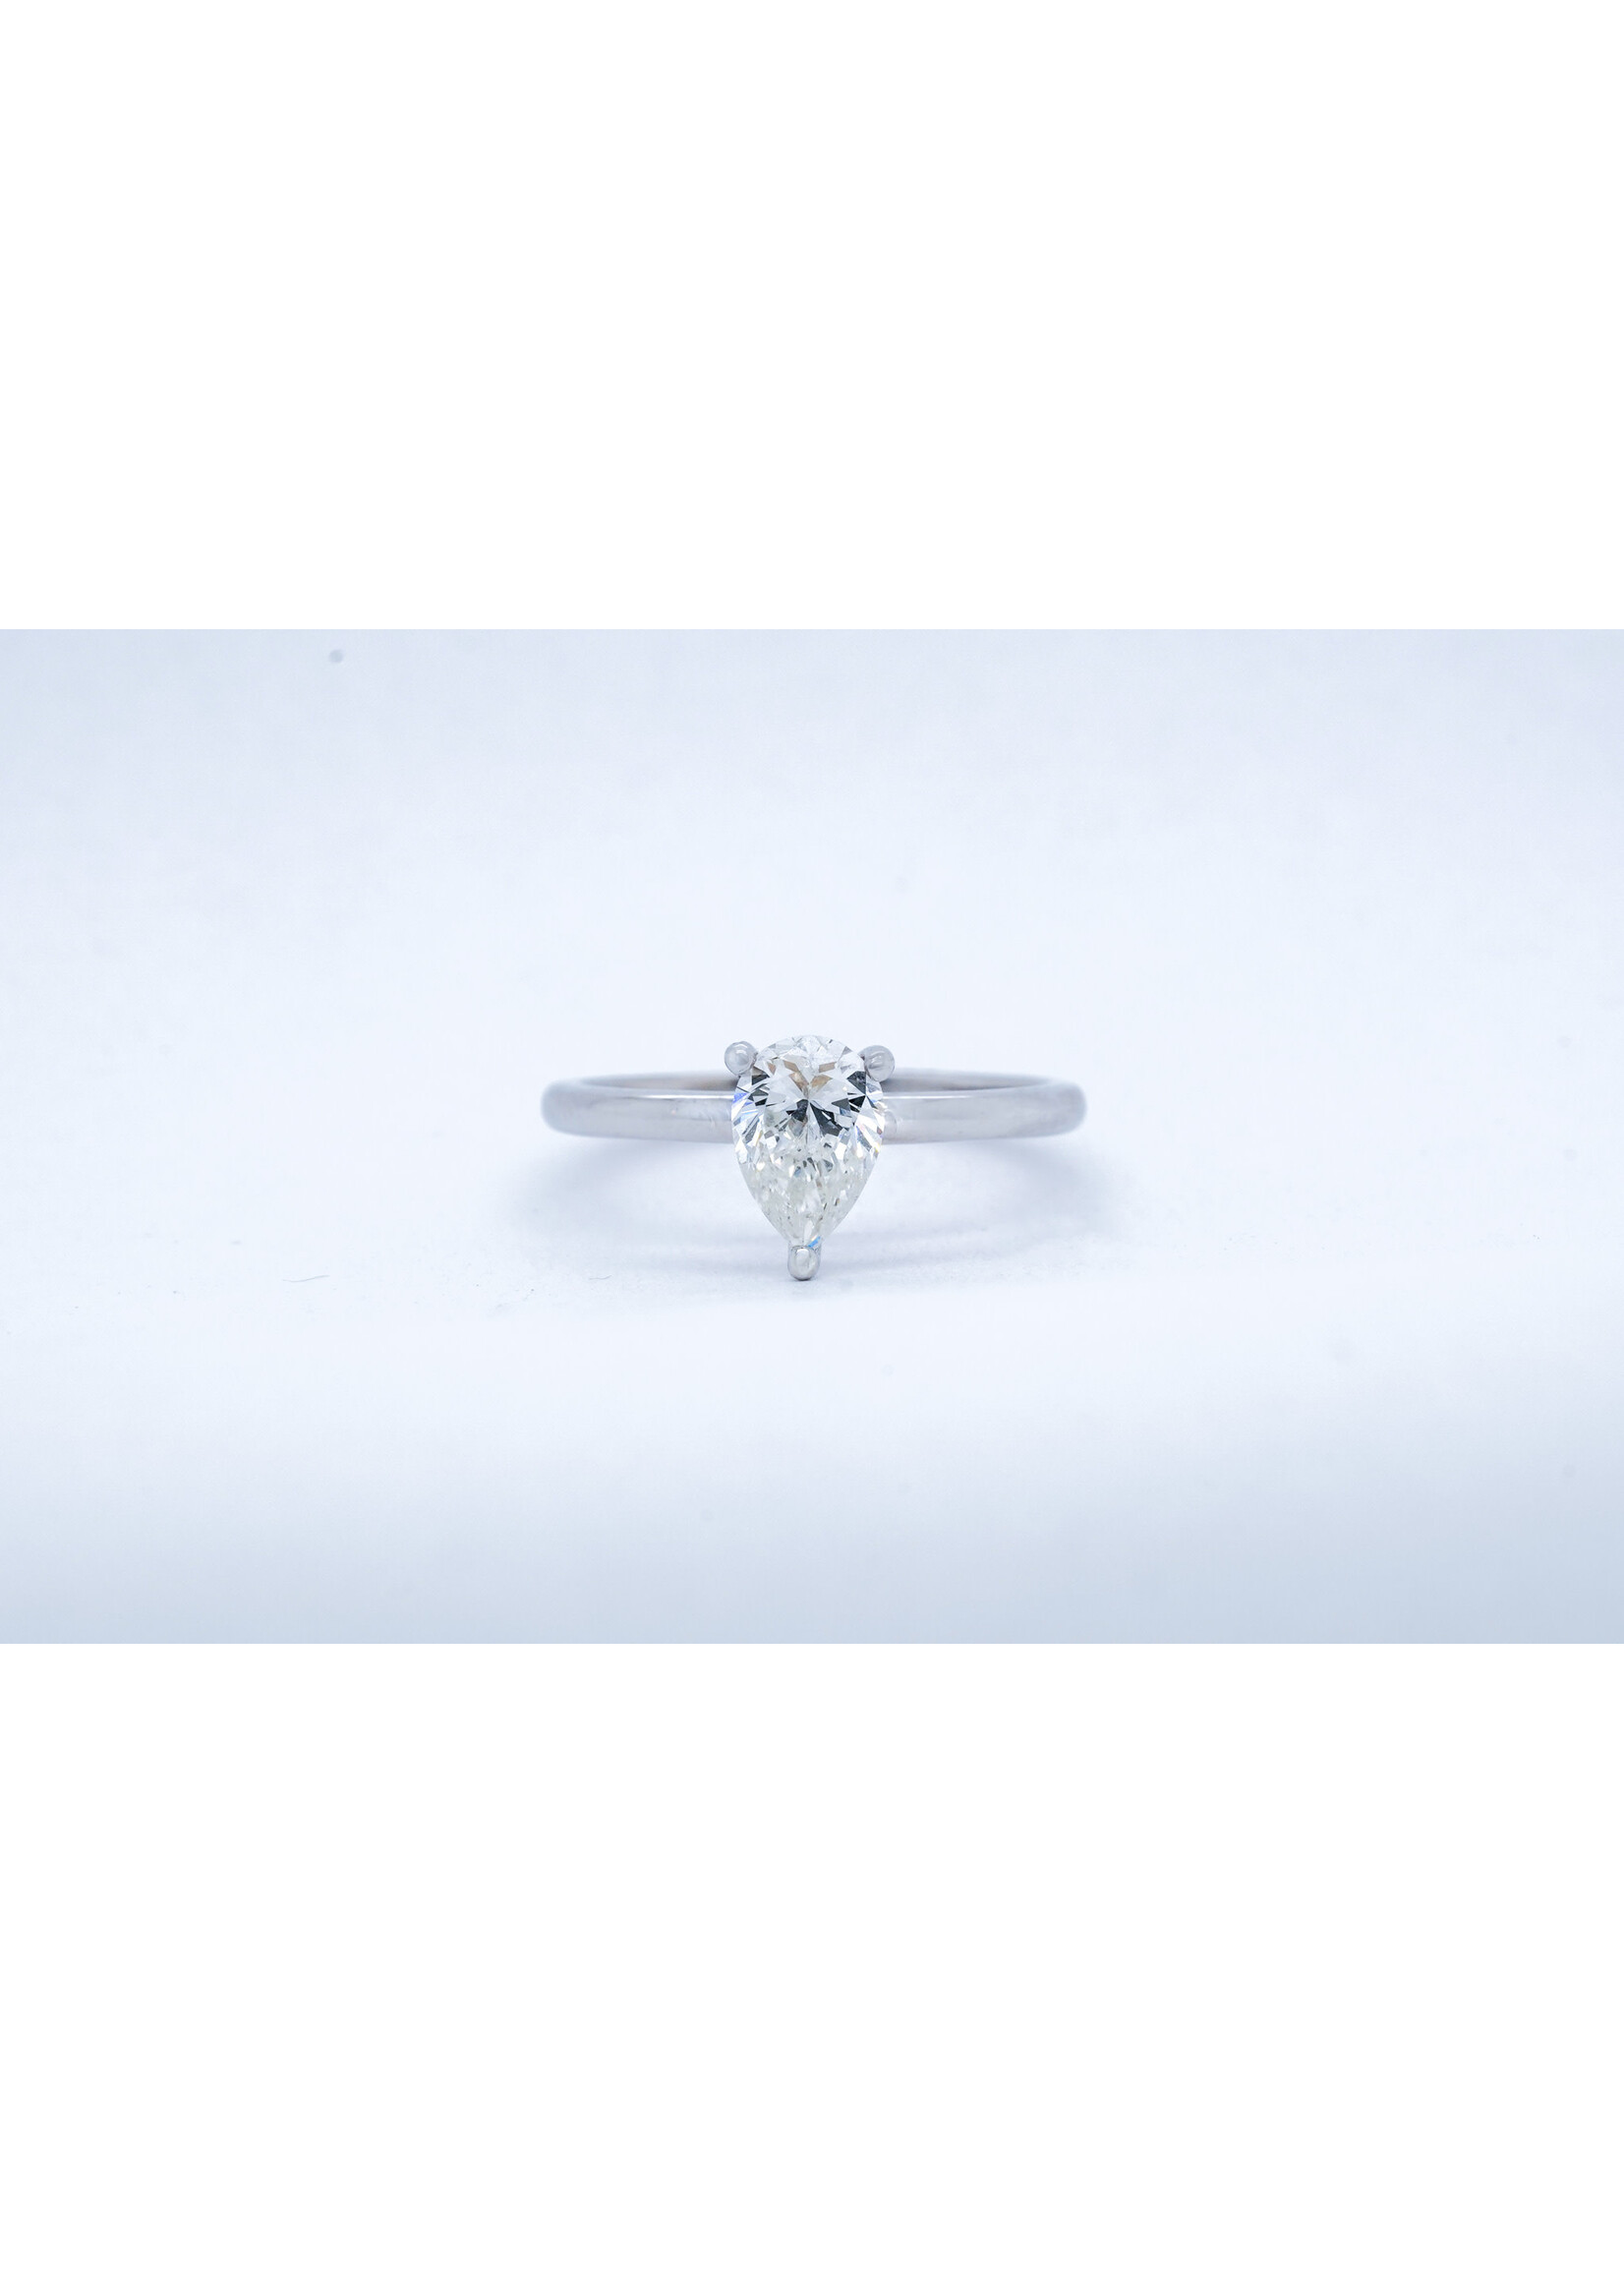 14KW 2.54g 1.04ct G/SI2 Pear Diamond Solitaire Engagement Ring (size 7)